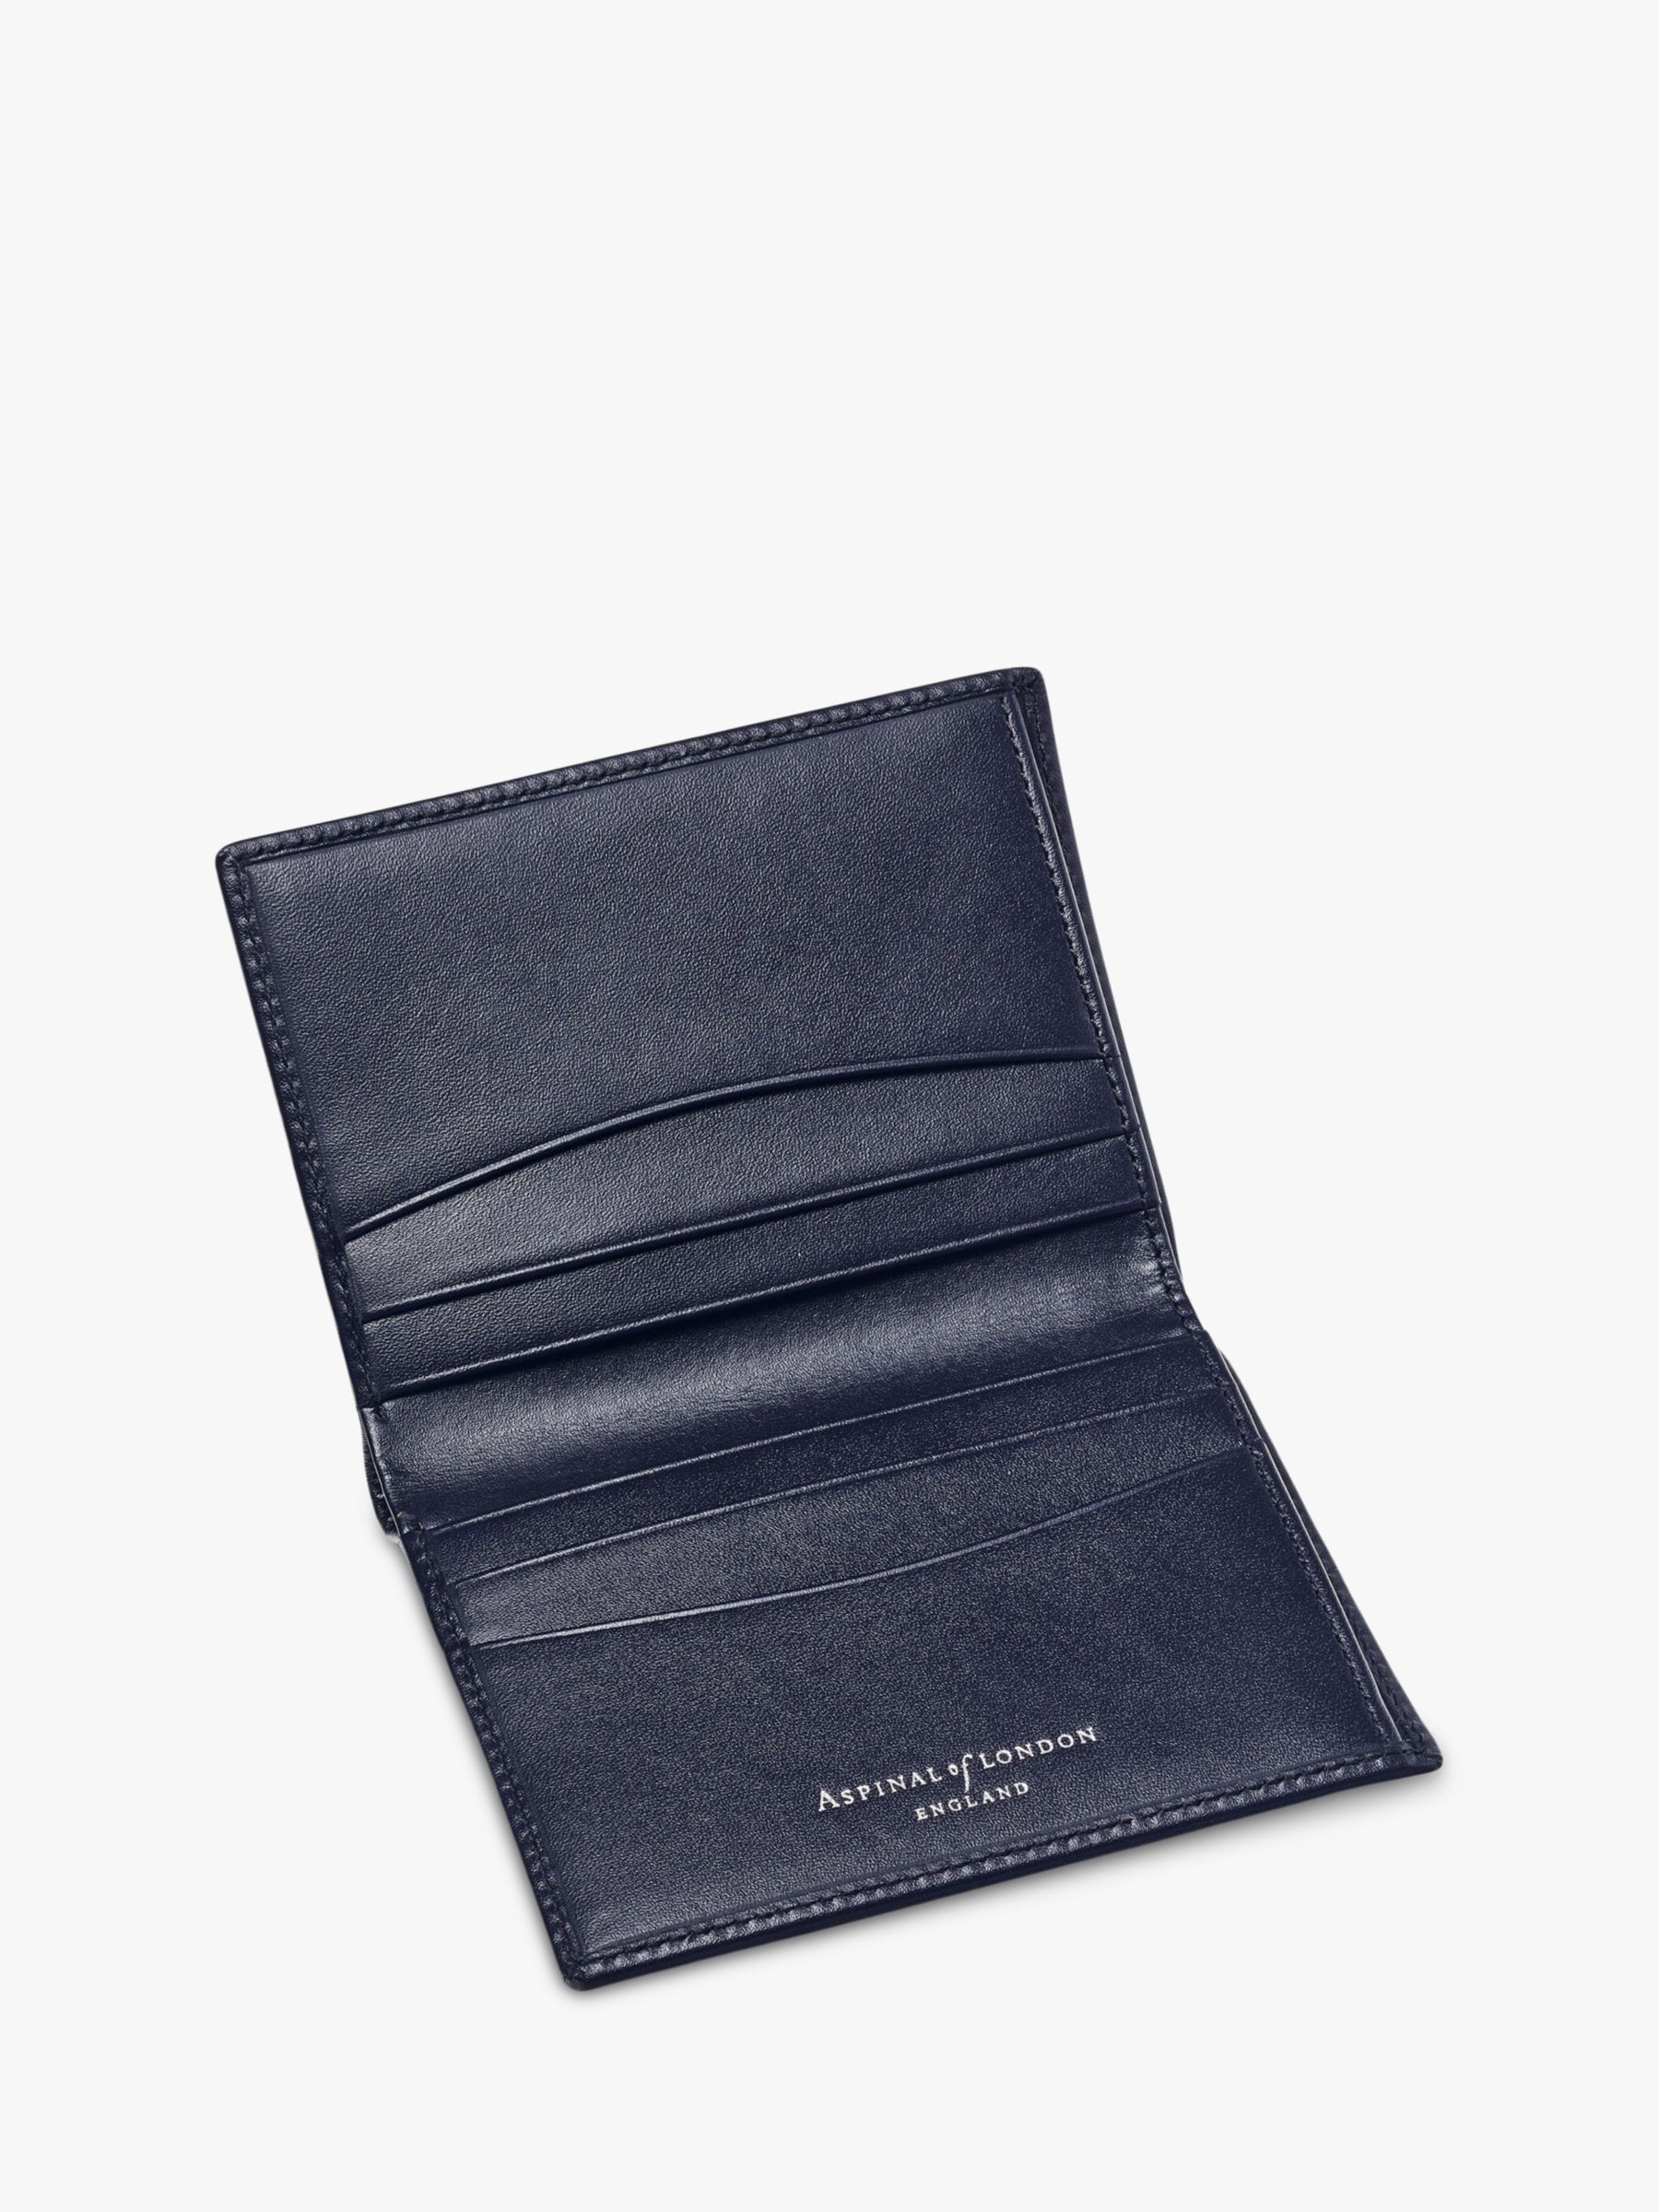 Buy Aspinal of London Smooth Leather Double Credit Card Wallet Online at johnlewis.com